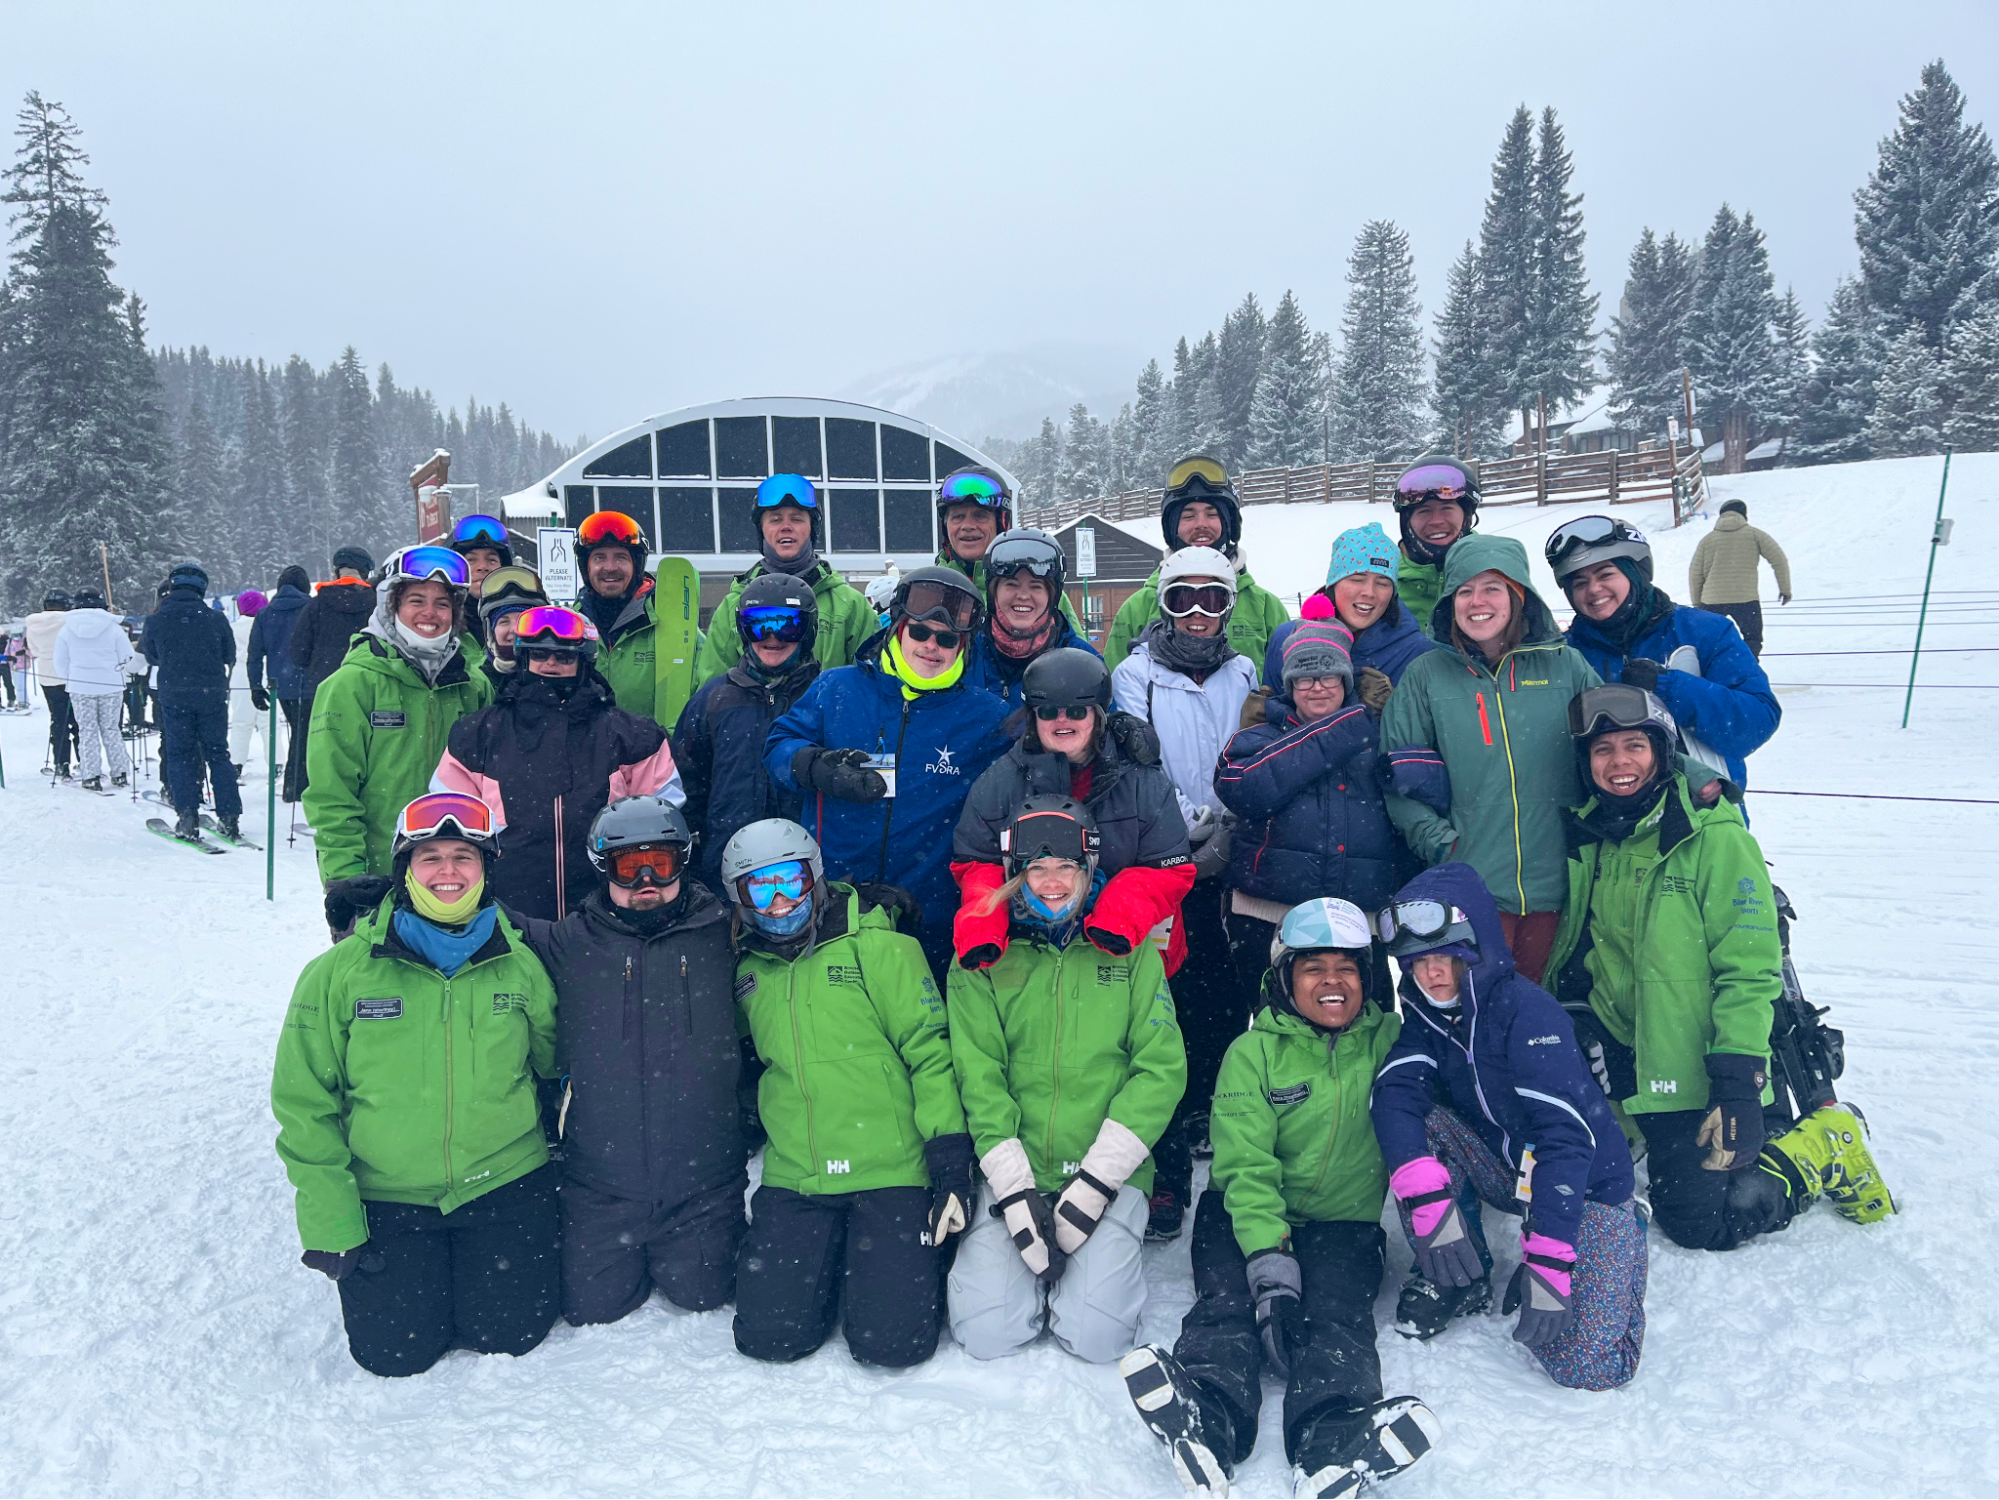 A day of fun on the slopes with the FVSRA group this year in Breckenridge.